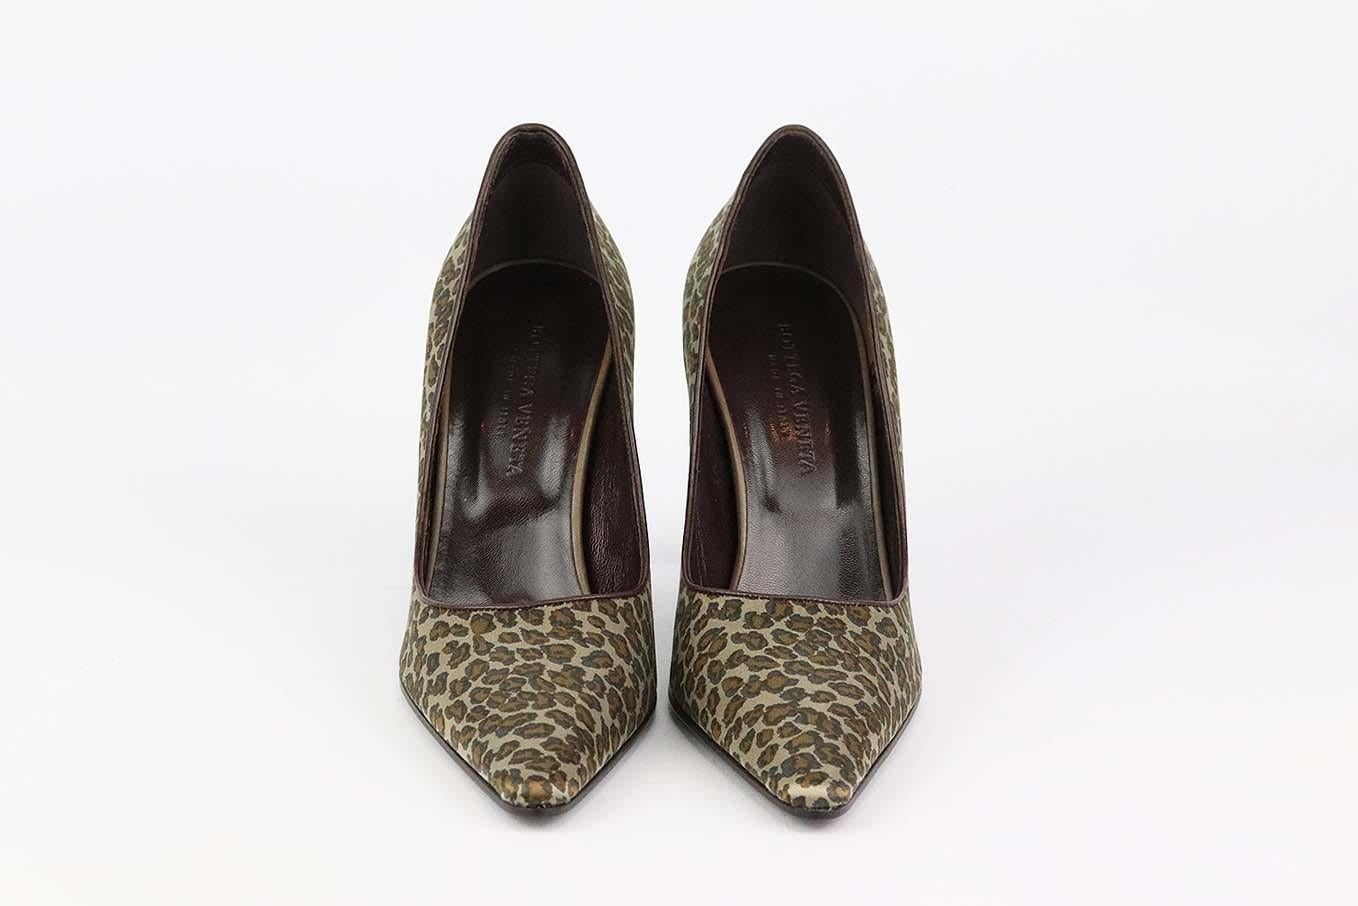 These Vintage pumps by Bottega Veneta are a classic style that will never date, made in Italy from supple taupe, brown and black satin, they have pointed toes and leopard-print throughout and comfortable 76 mm heels to take you from morning meetings